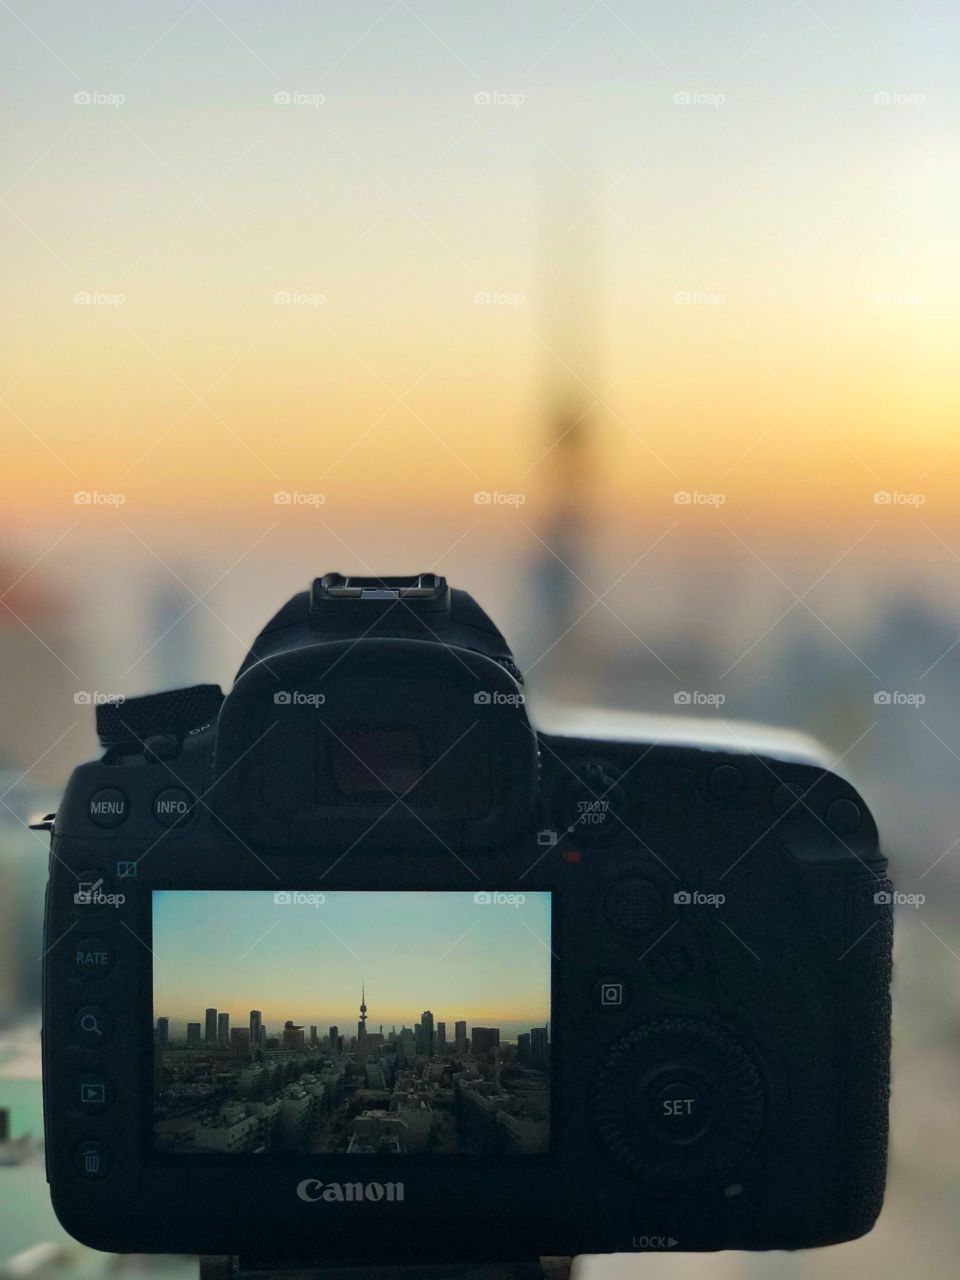 While taking a picture of Kuwait City